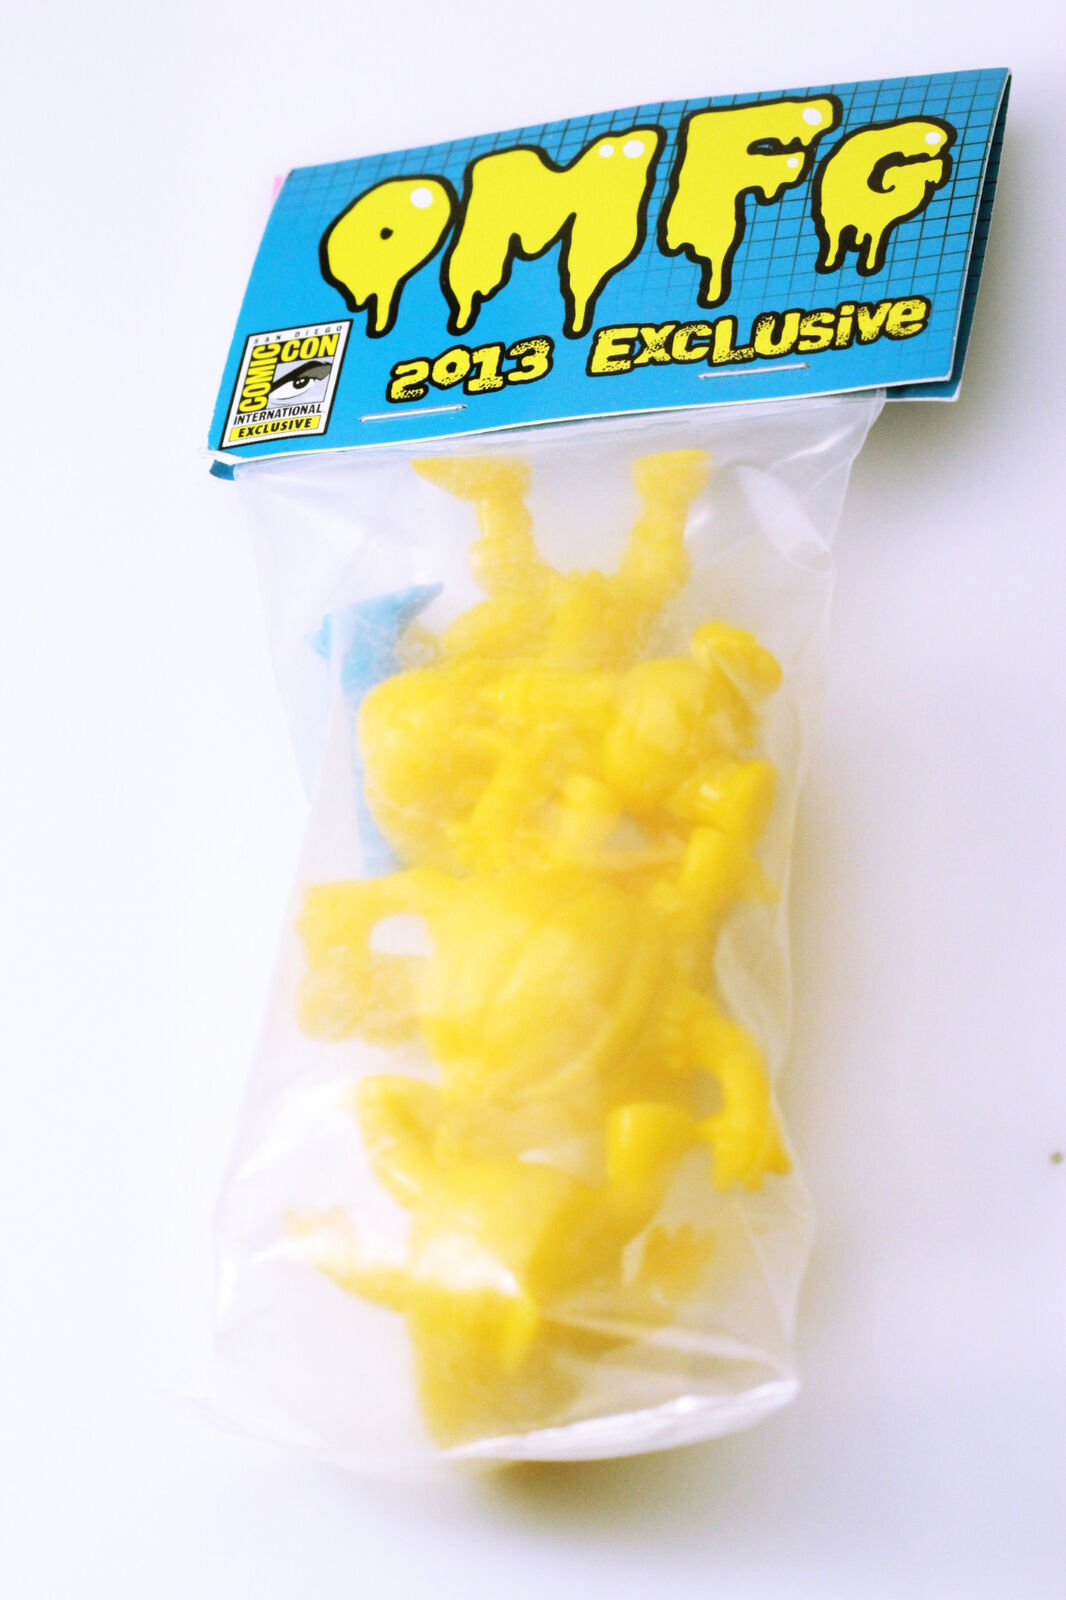 2013 Comic Con Exclusize OMFG Toys 65.2 Grams (COL1026)